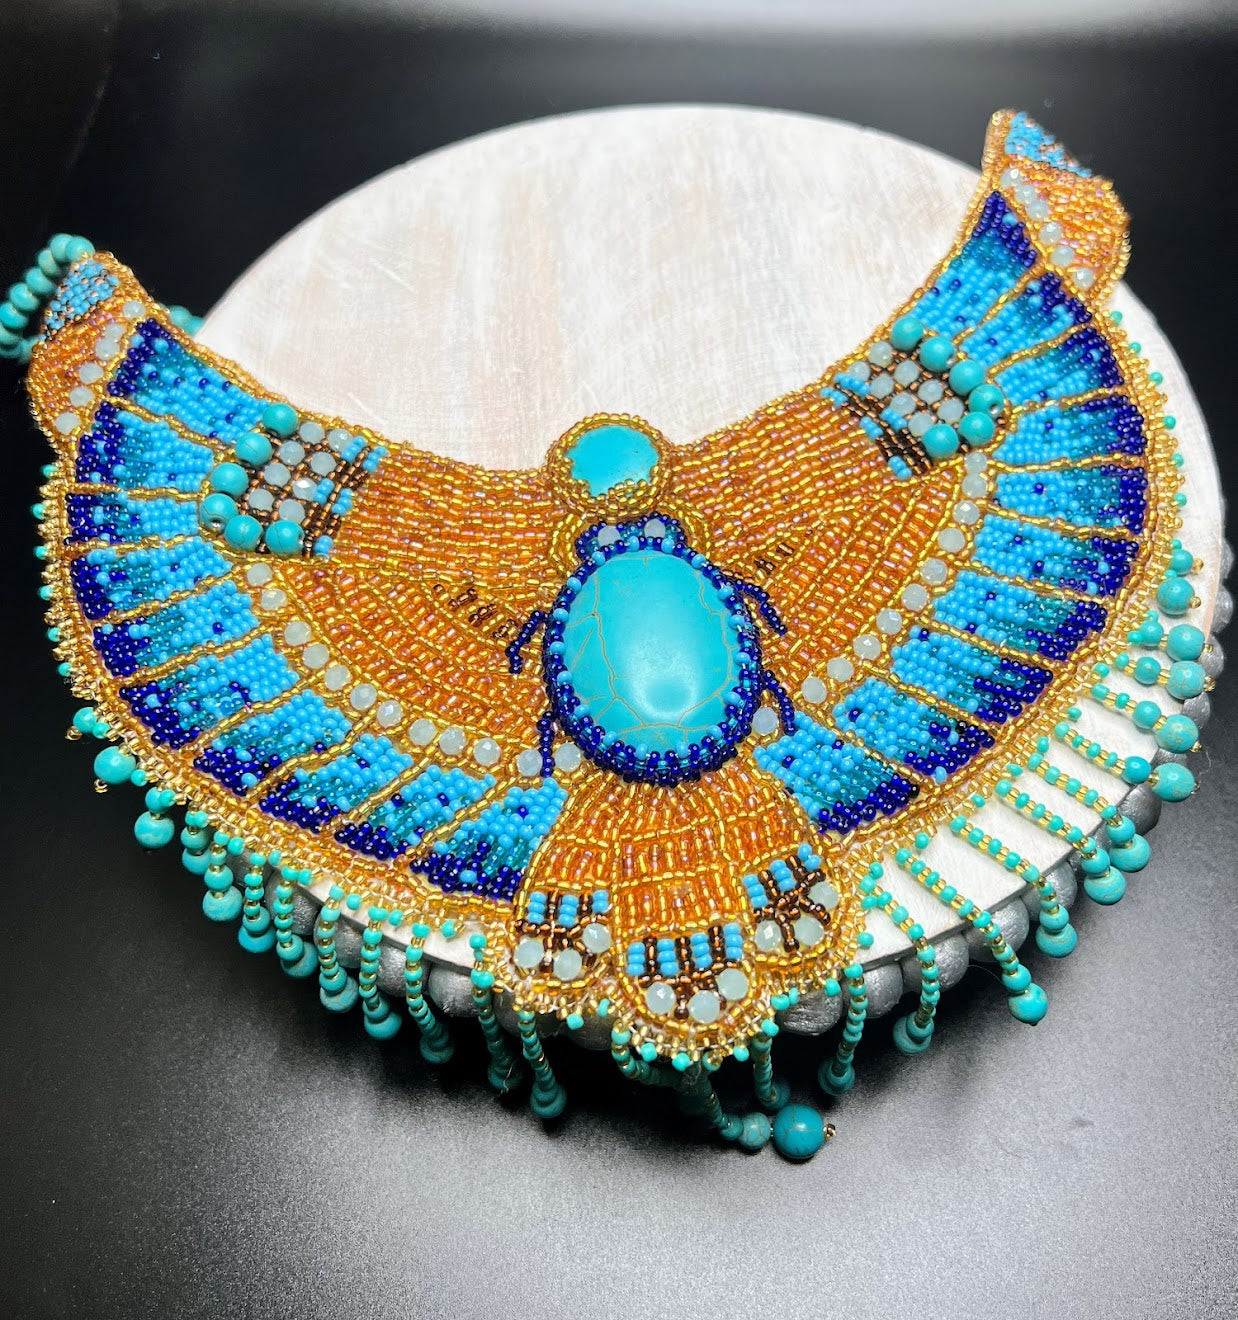 Roseberys London | An Italian fringe necklace, or 'Cleopatra' collar, with